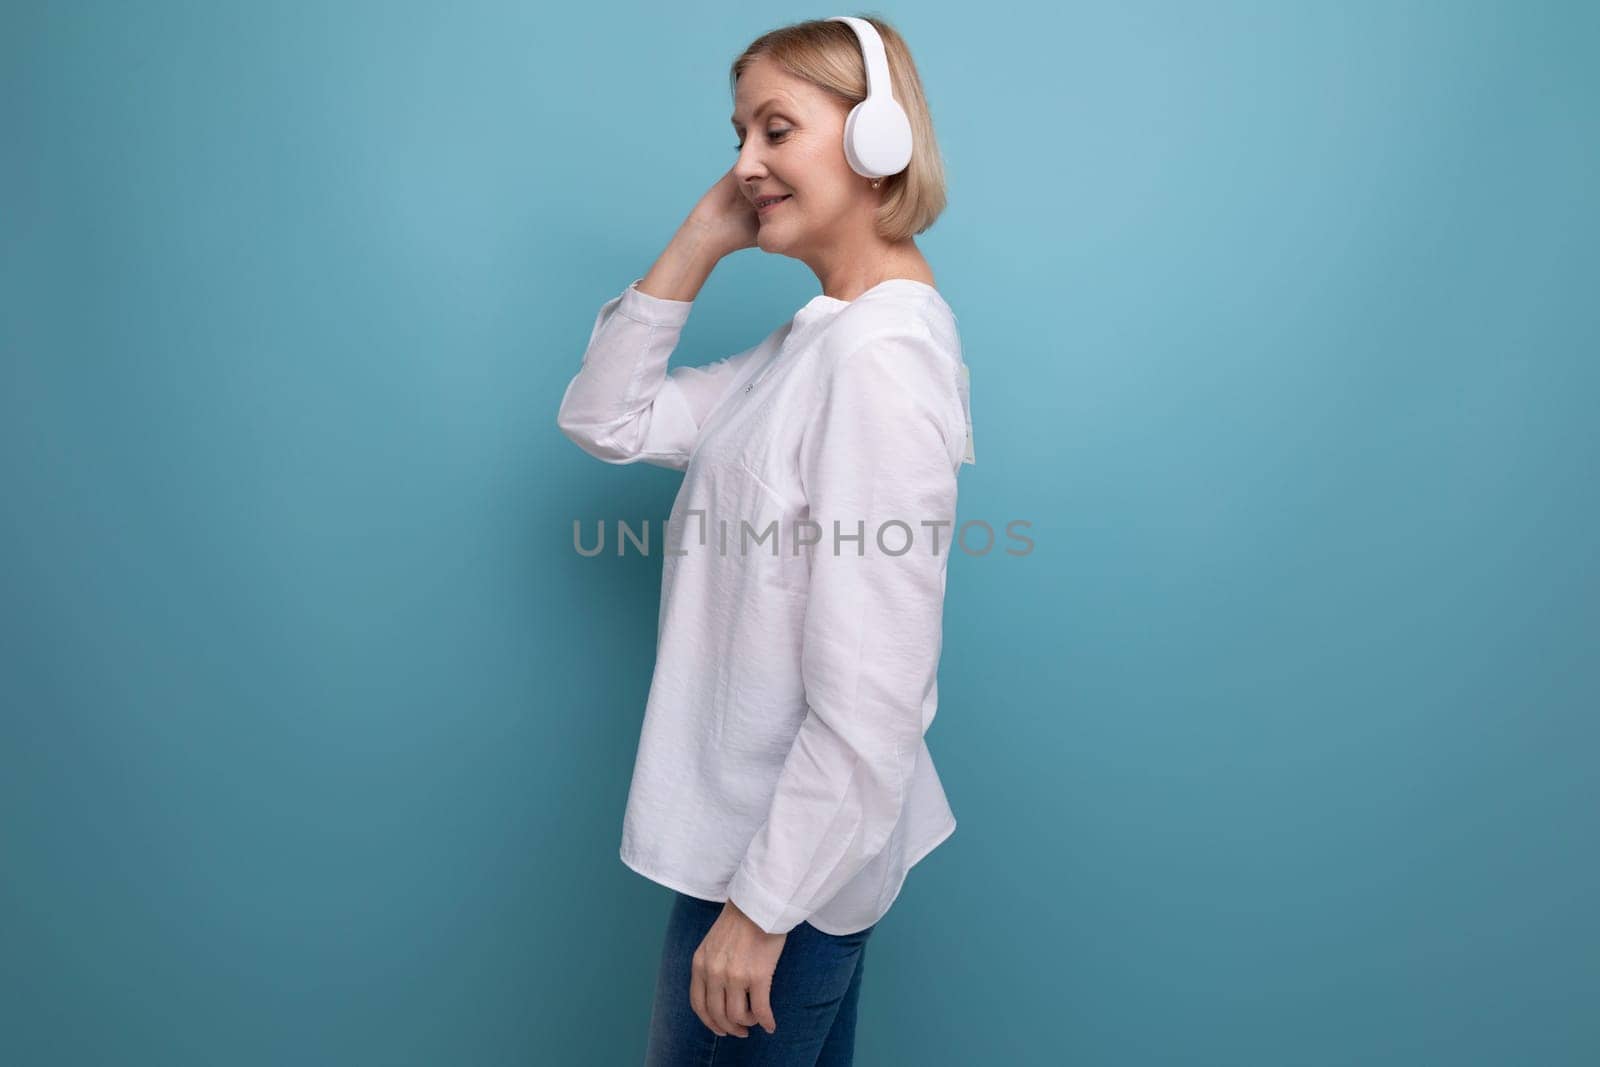 50s woman with blonde hair dancing to music in wireless headphones by TRMK